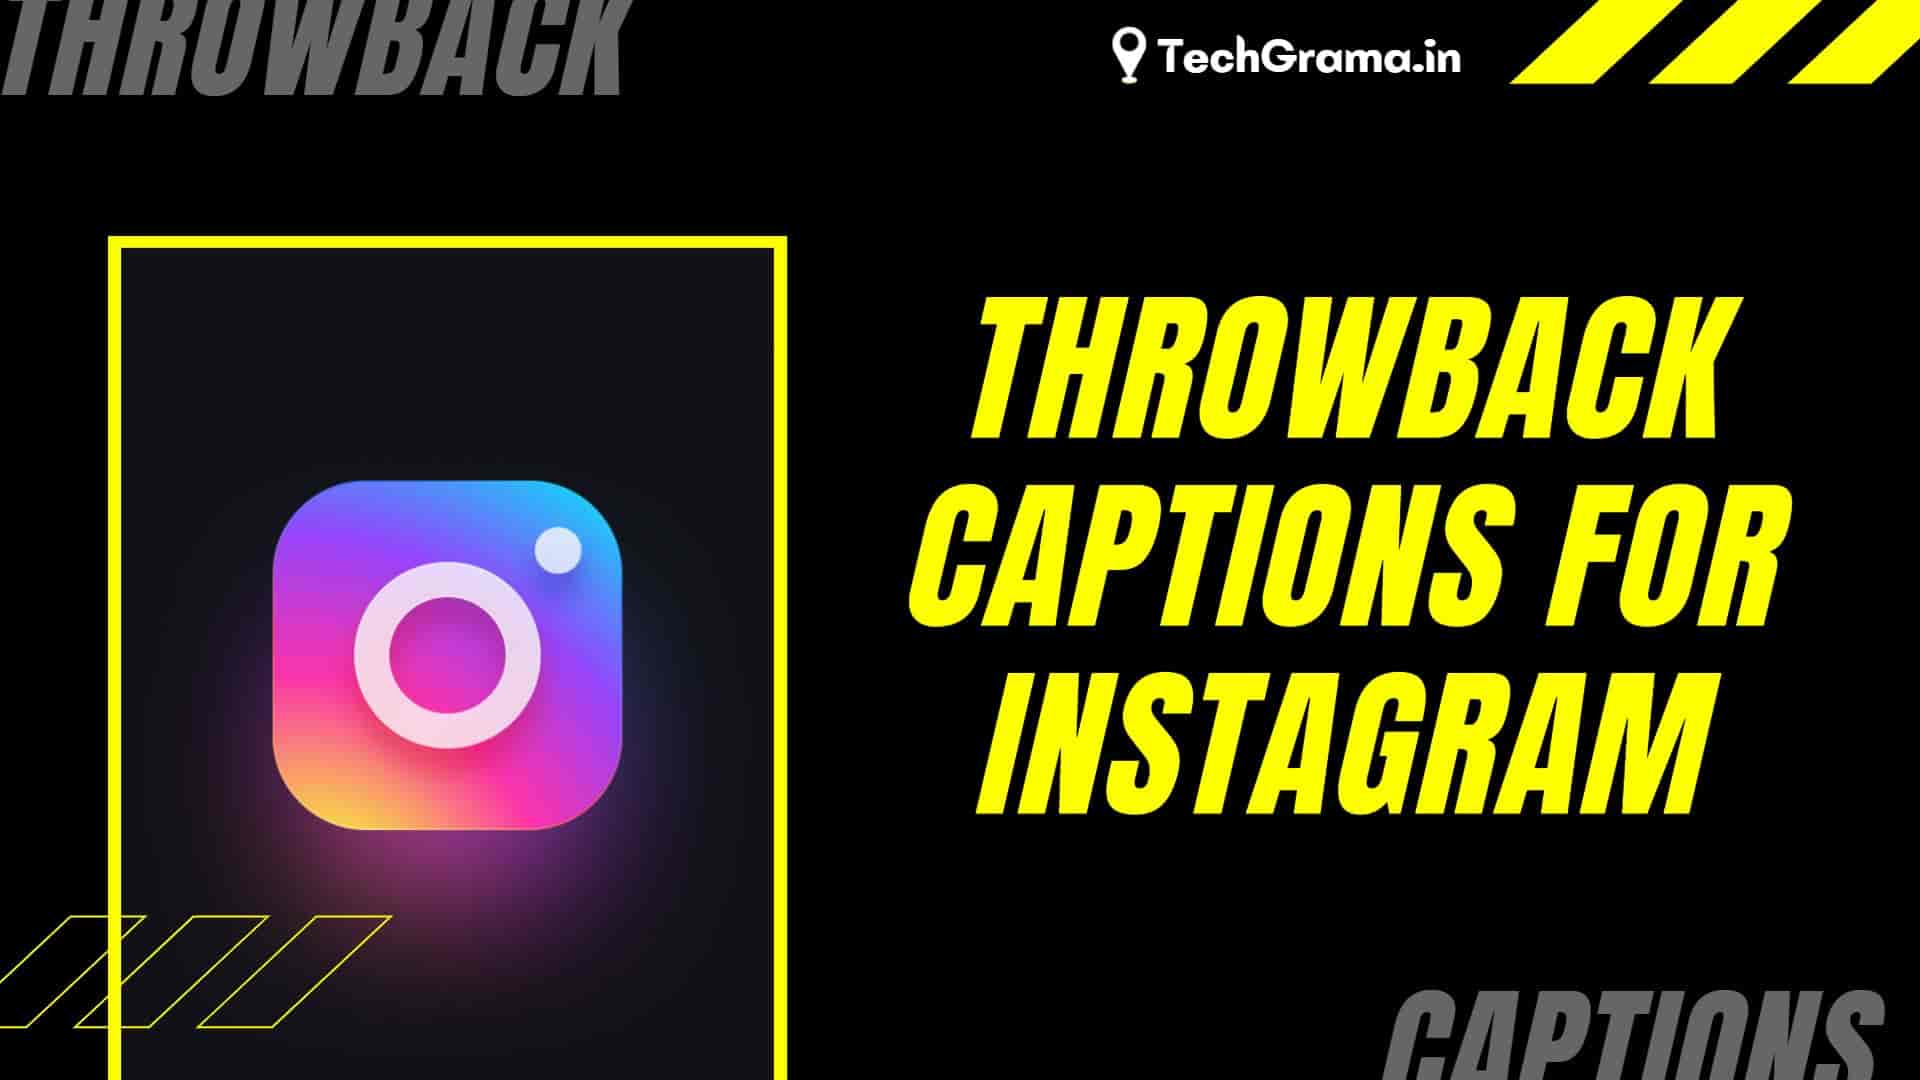 Best Throwback Captions For Instagram, Throwback Picture Captions, Throwback Thursday Captions, Throwback Selfie Captions, Throwback Captions For Travel, Throwback Captions For Myself, Throwback Instagram Captions, Captions About Throwback, Throwback To Vacation Captions, Throwback Captions With Friends, Throwback Childhood Picture Captions, Throwback Photo Captions For Instagram.